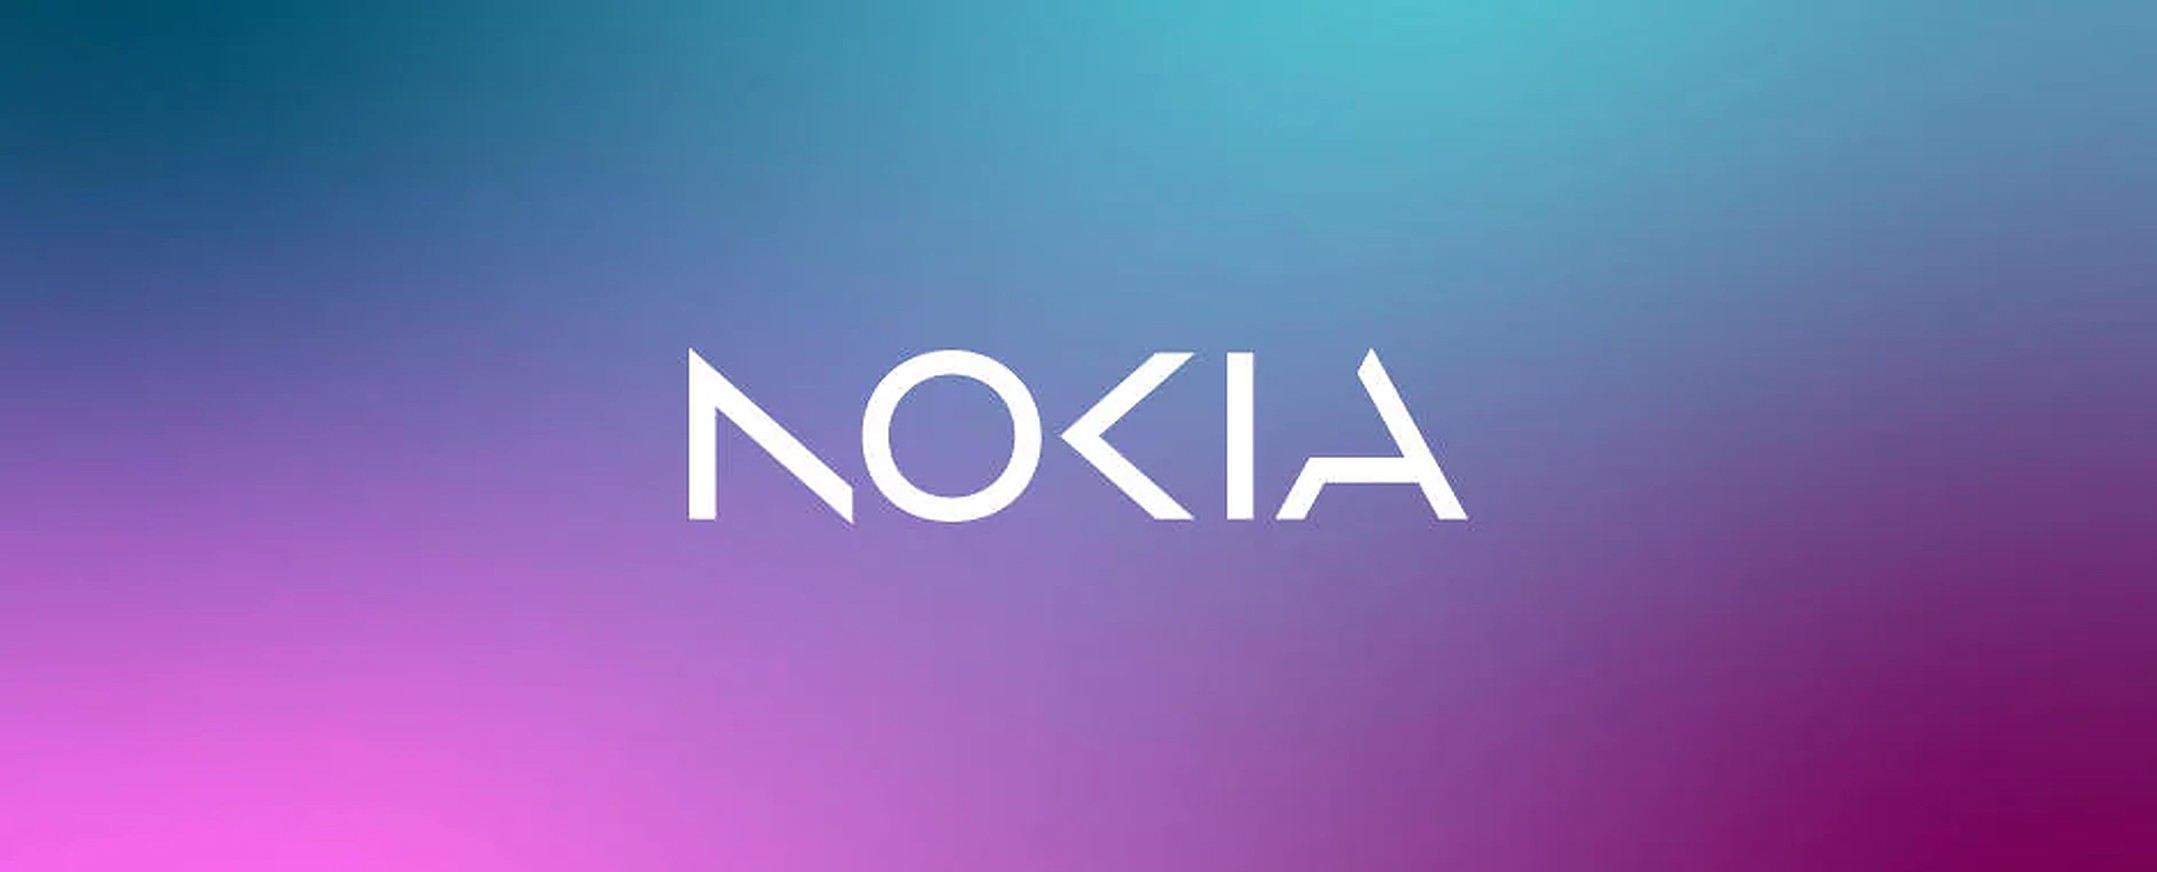 Nokia renews agreement with Apple for 5G: why is it important?